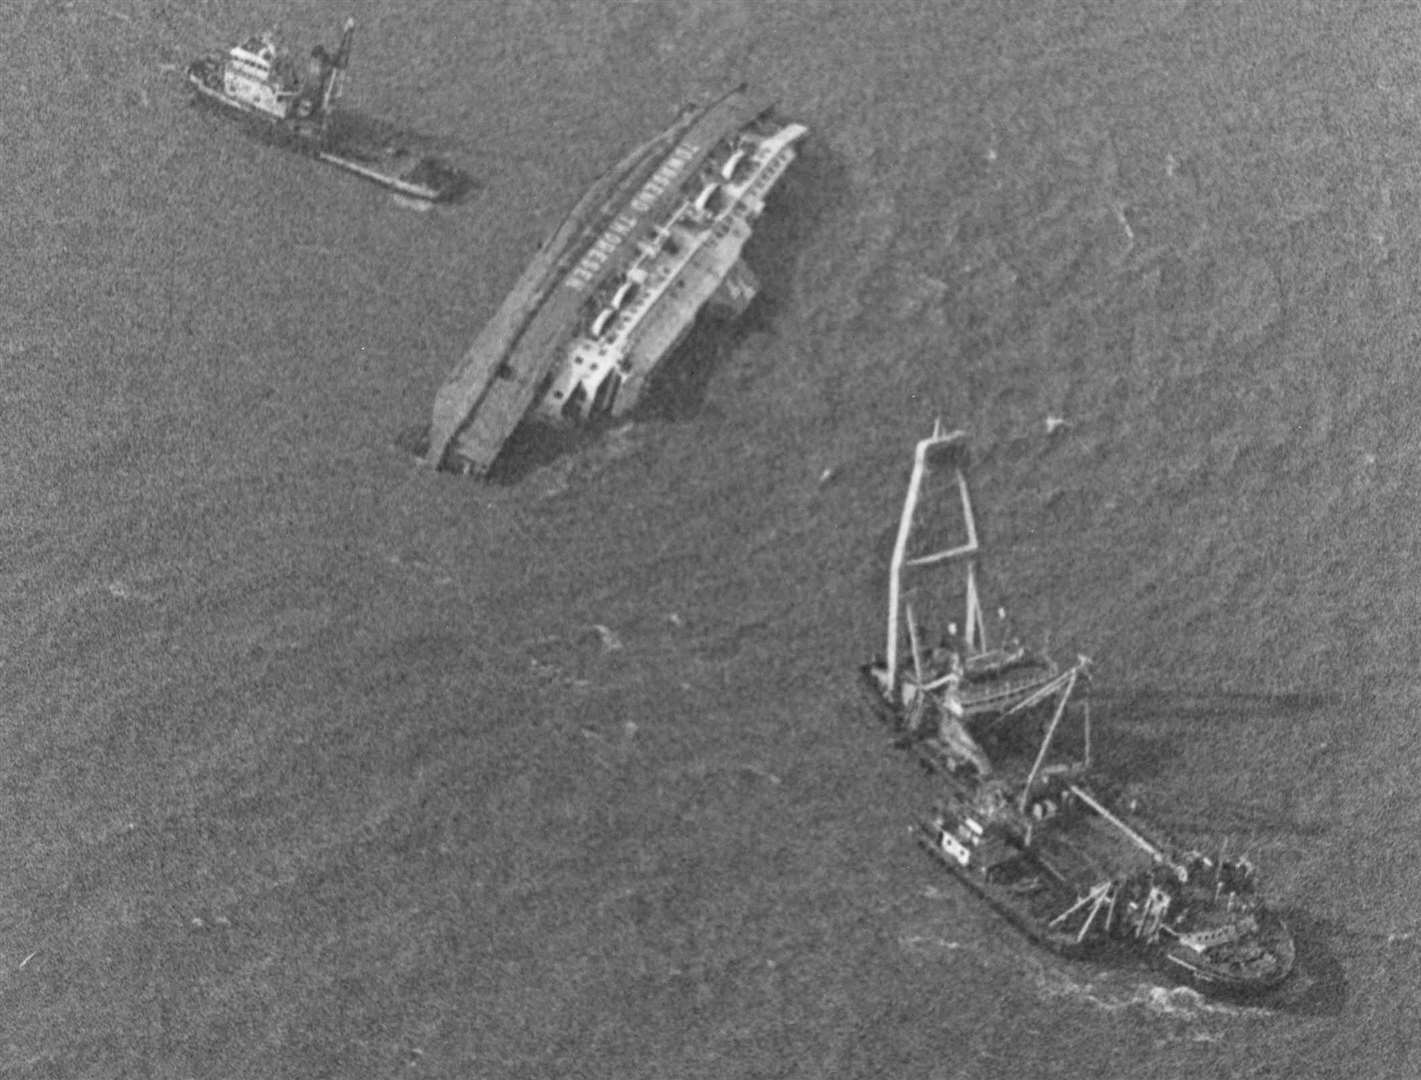 Aerial view of Herald of Free Enterprise, which capsized March 1987